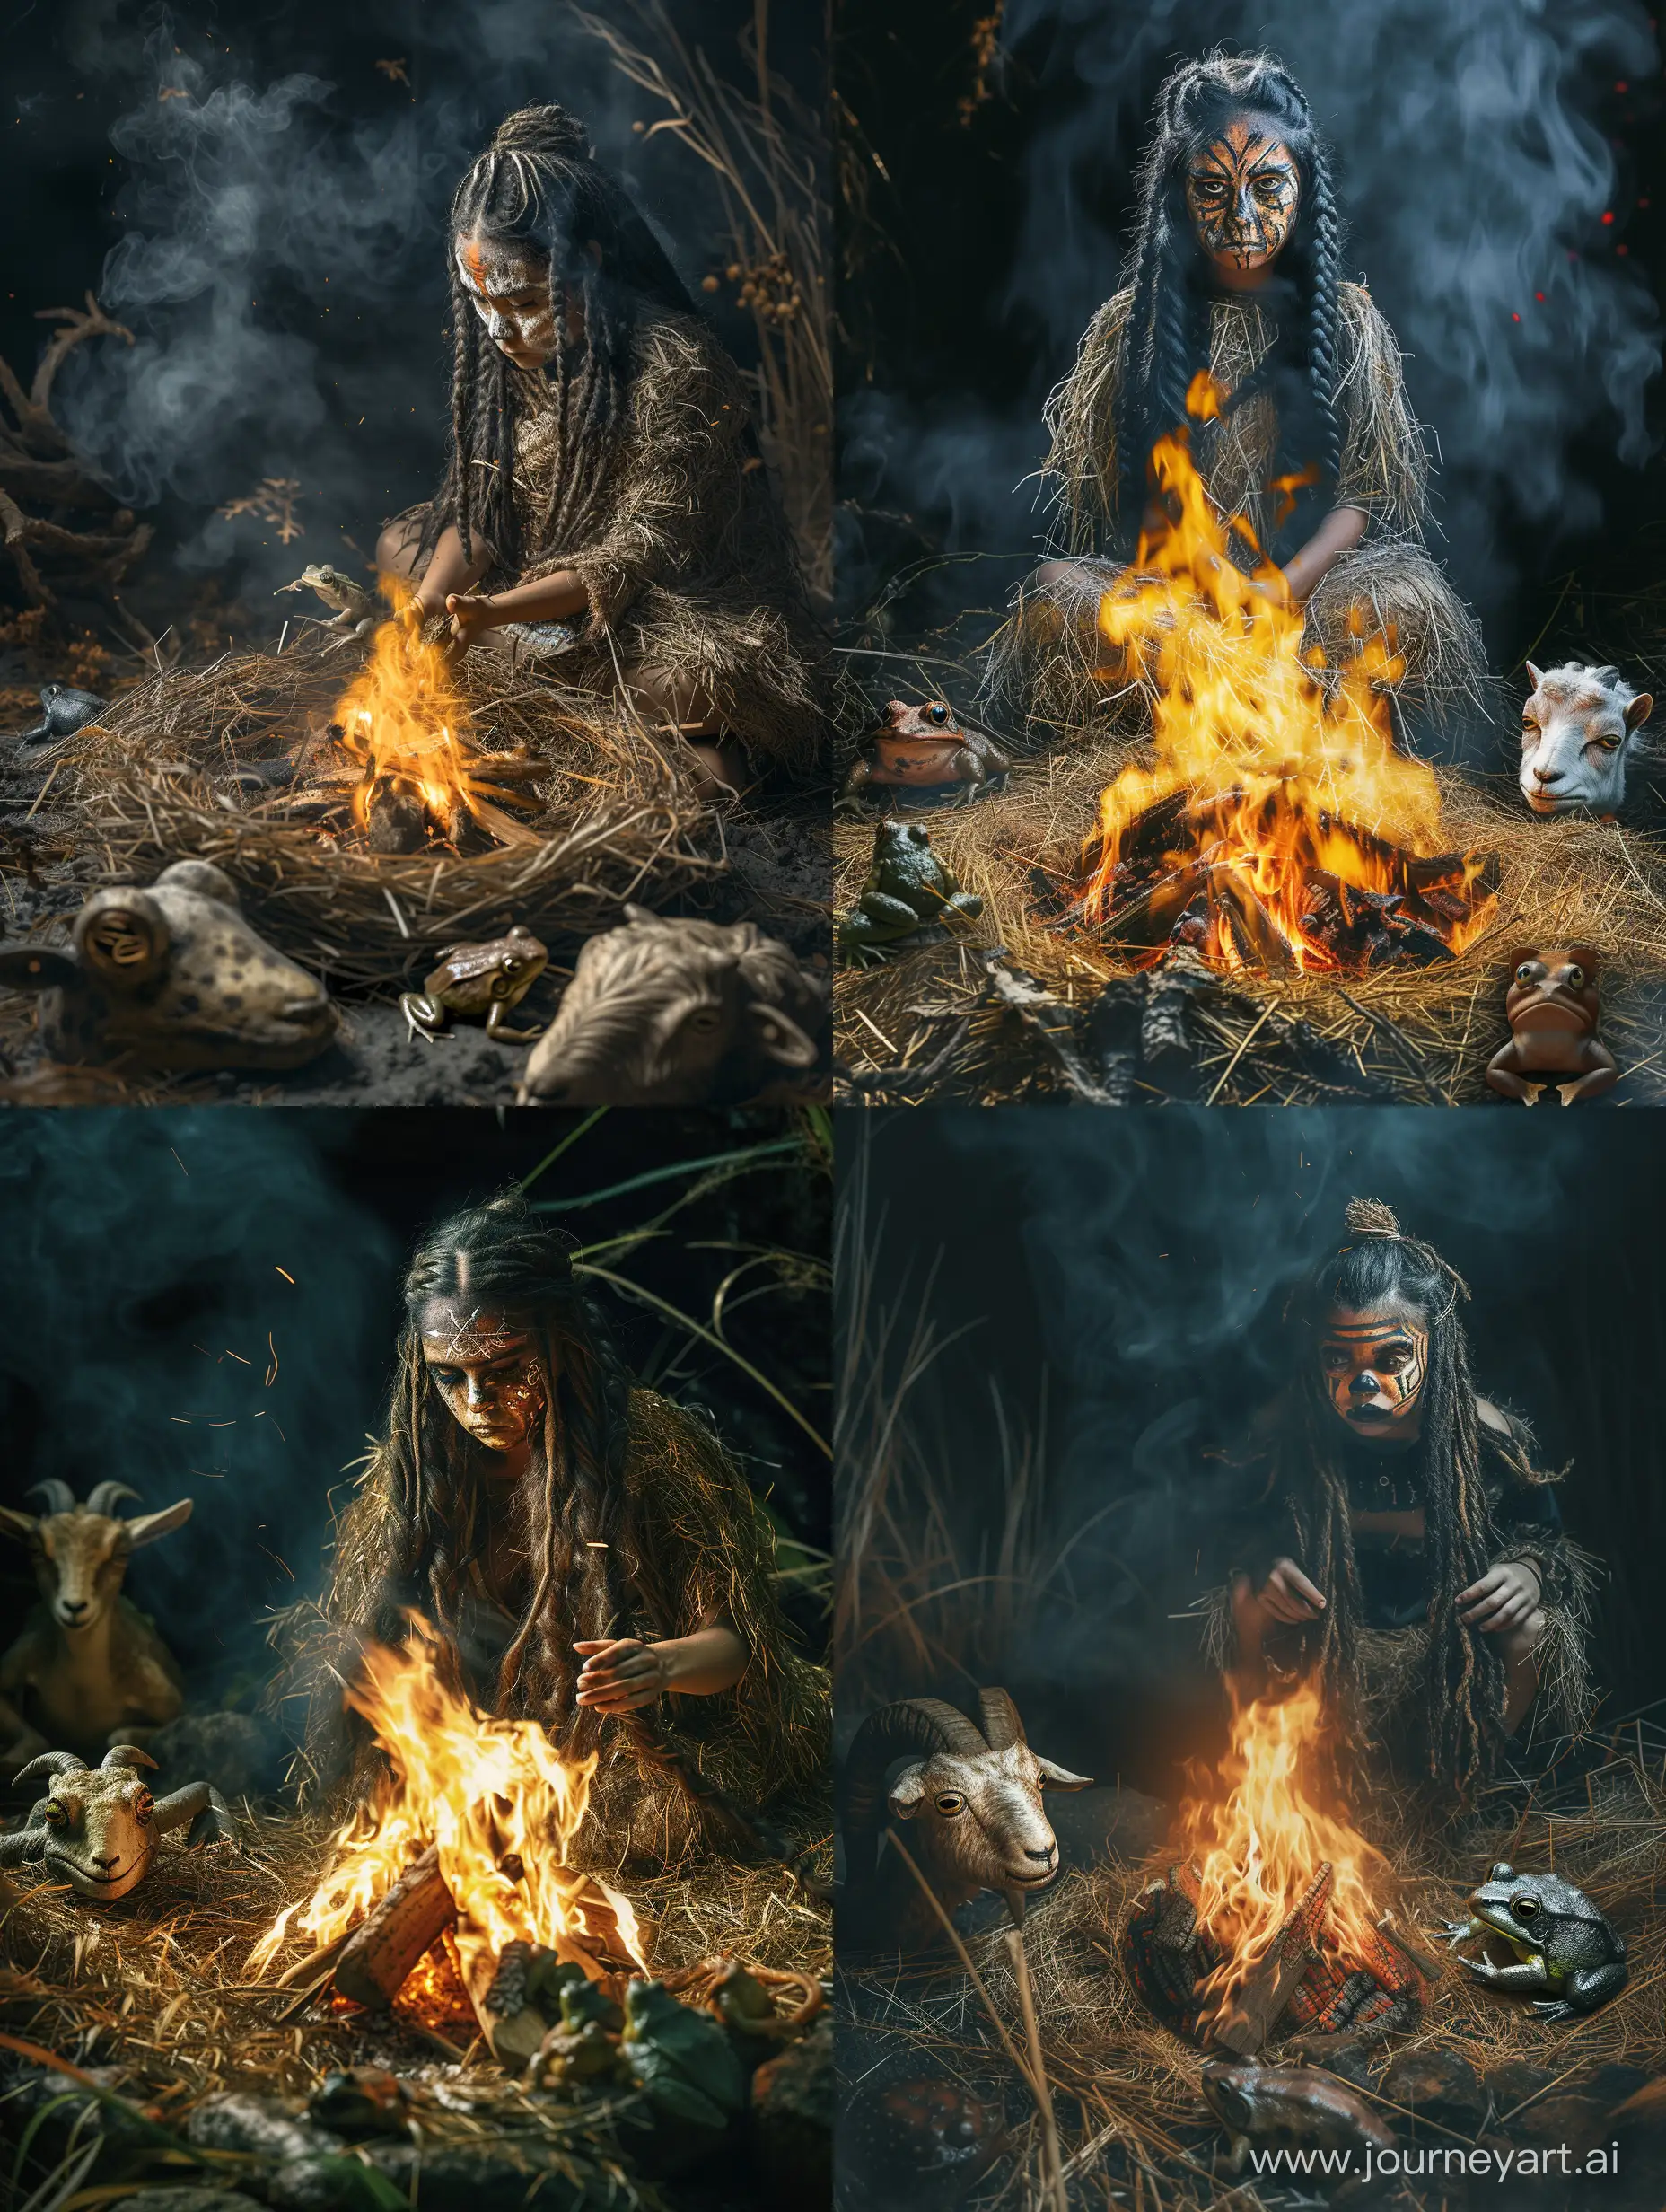 Dark shaman girl doing her ritual dance in a dark mystic forest. A big campfire in front of her while she is performing the dance. She has long braided hair and weird facepaint. She is wearing a strange weird attire mixed up with straw. There are some frogs and a deceived goat head around the campfire. Exotic and smoky environment. Creepy realistic photo.